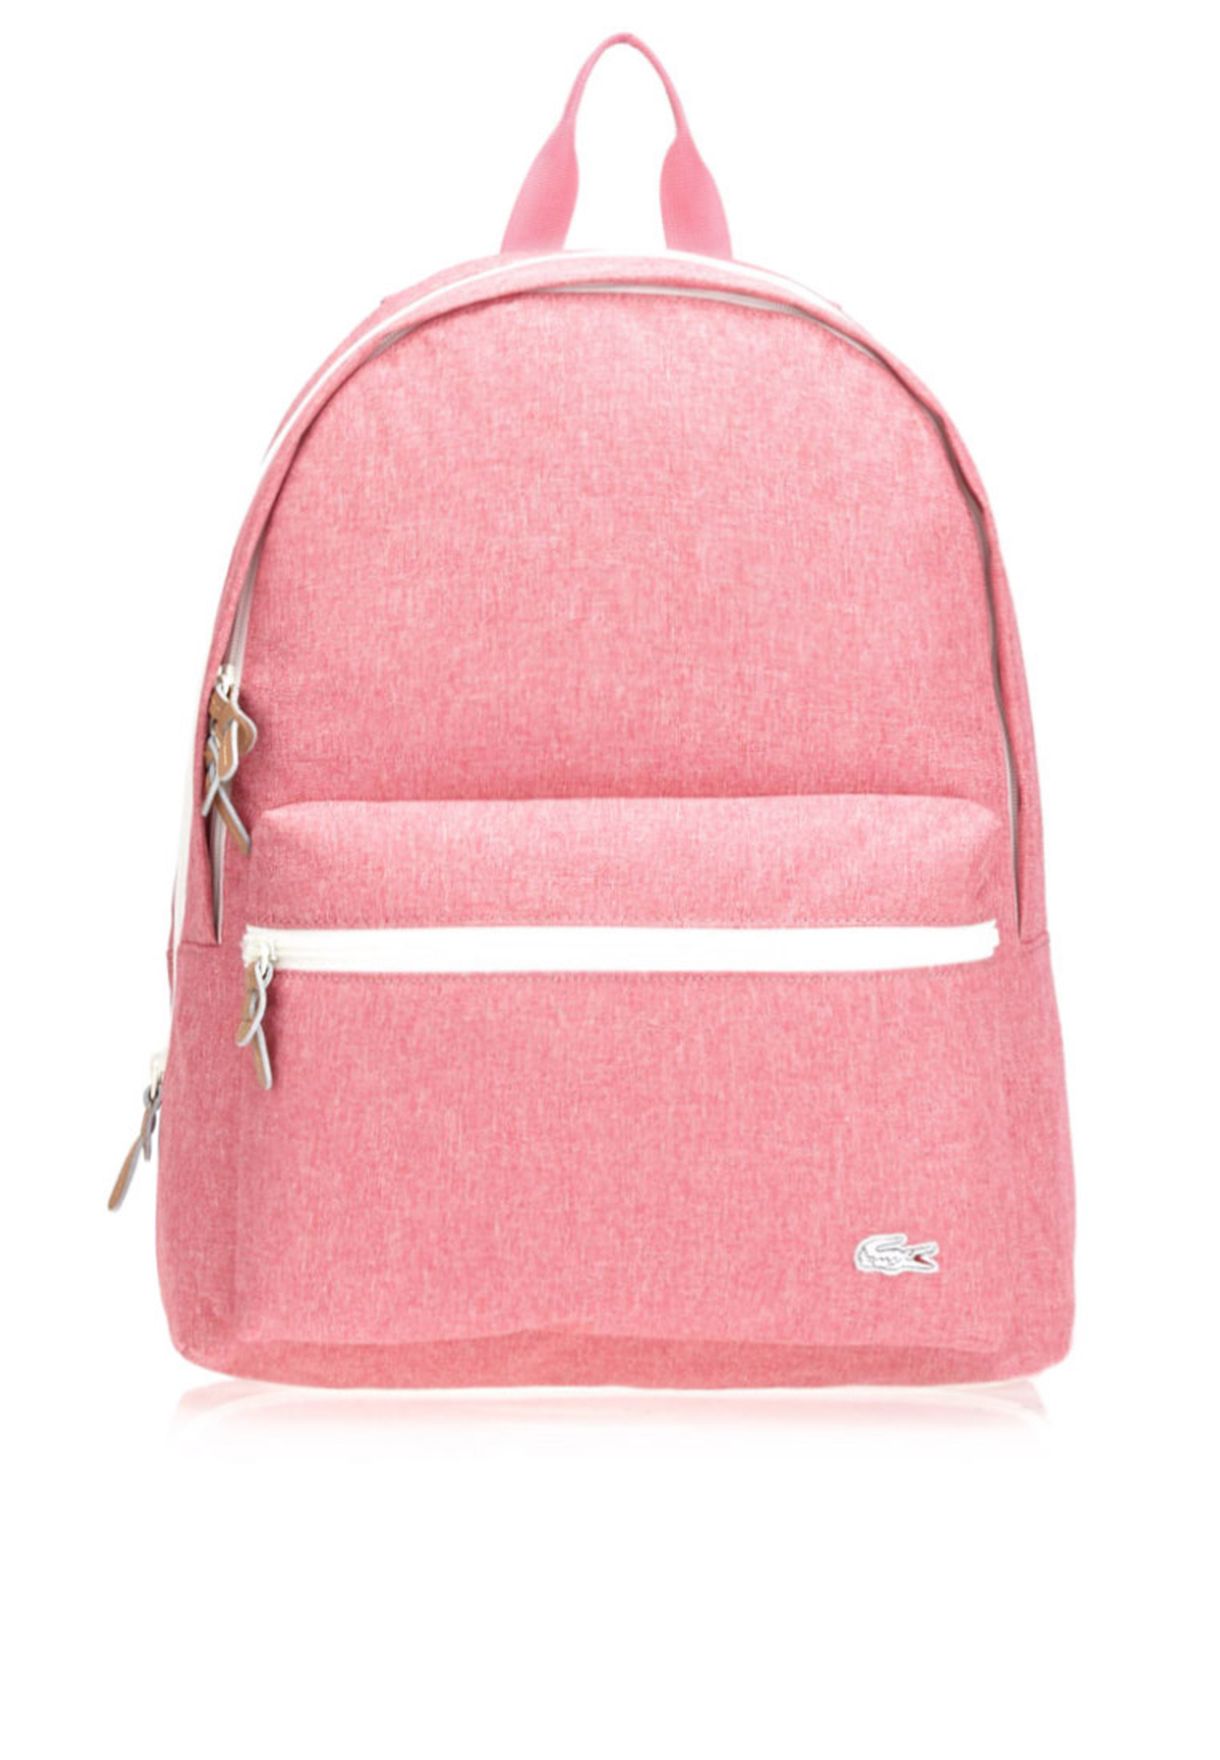 Buy Lacoste pink Backcroc Backpack for 